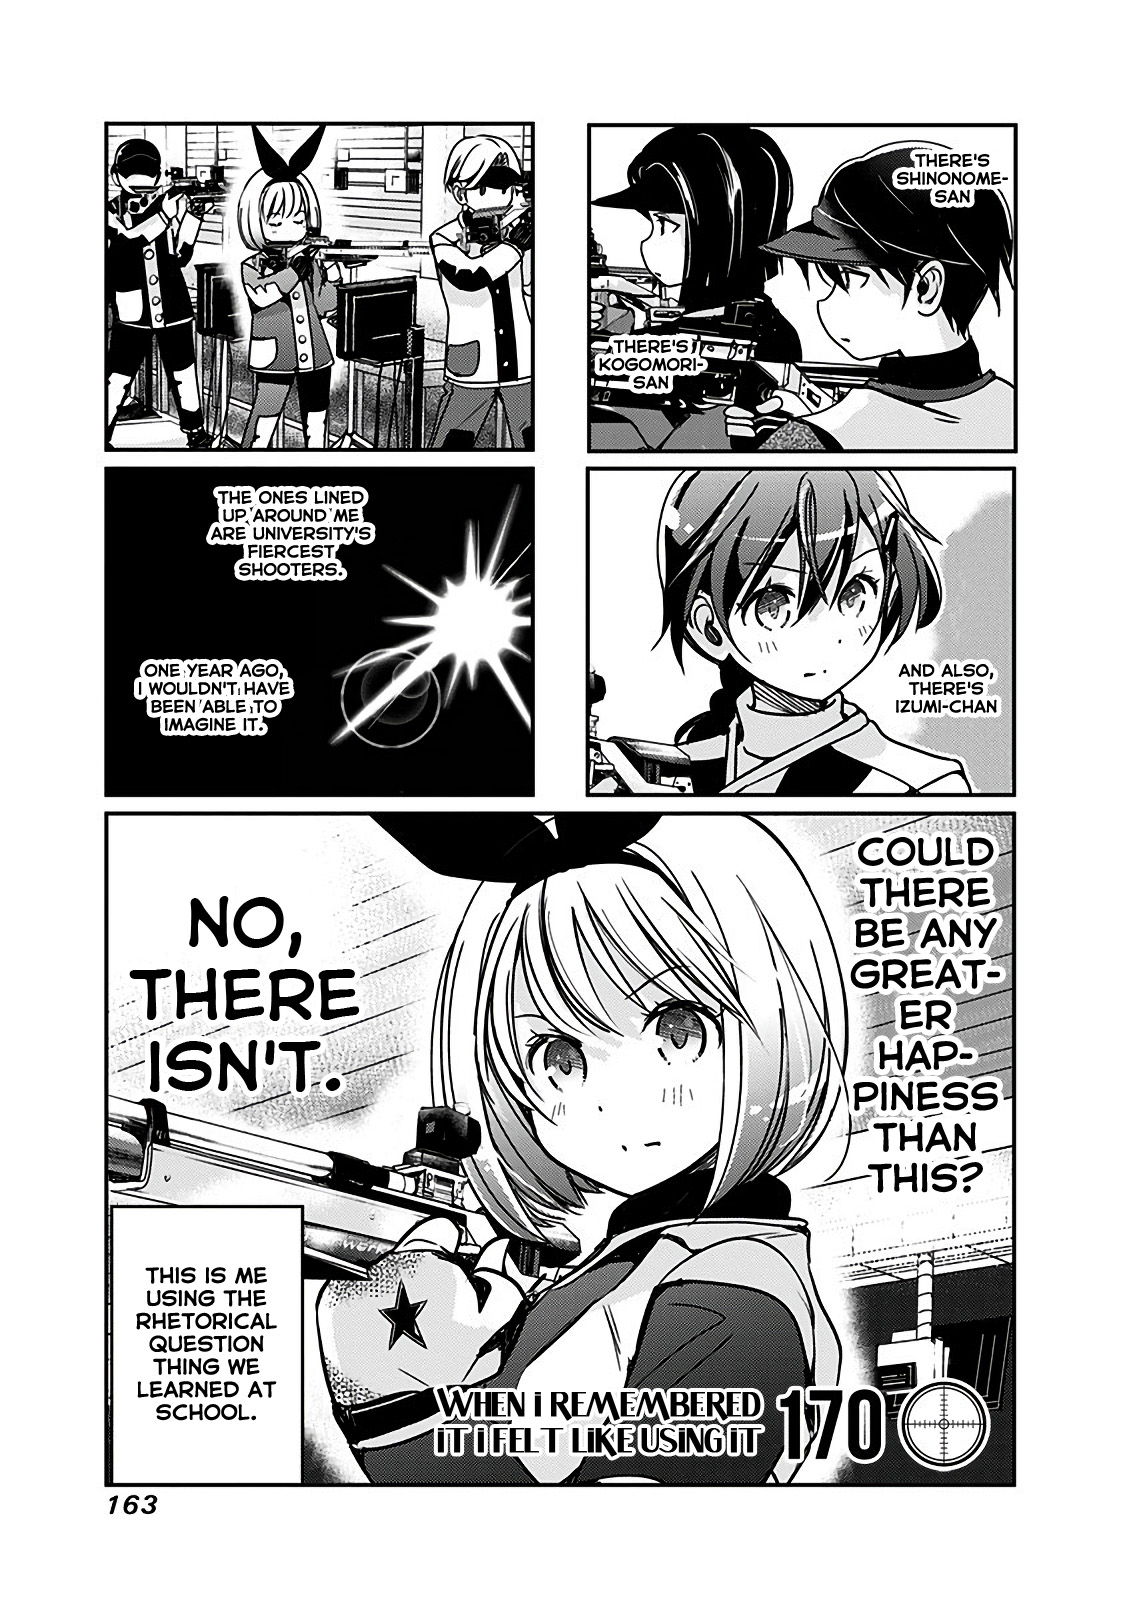 Rifle Is Beautiful Vol.6 Chapter 170: When I Remembered It I Felt Like Using It - Picture 1